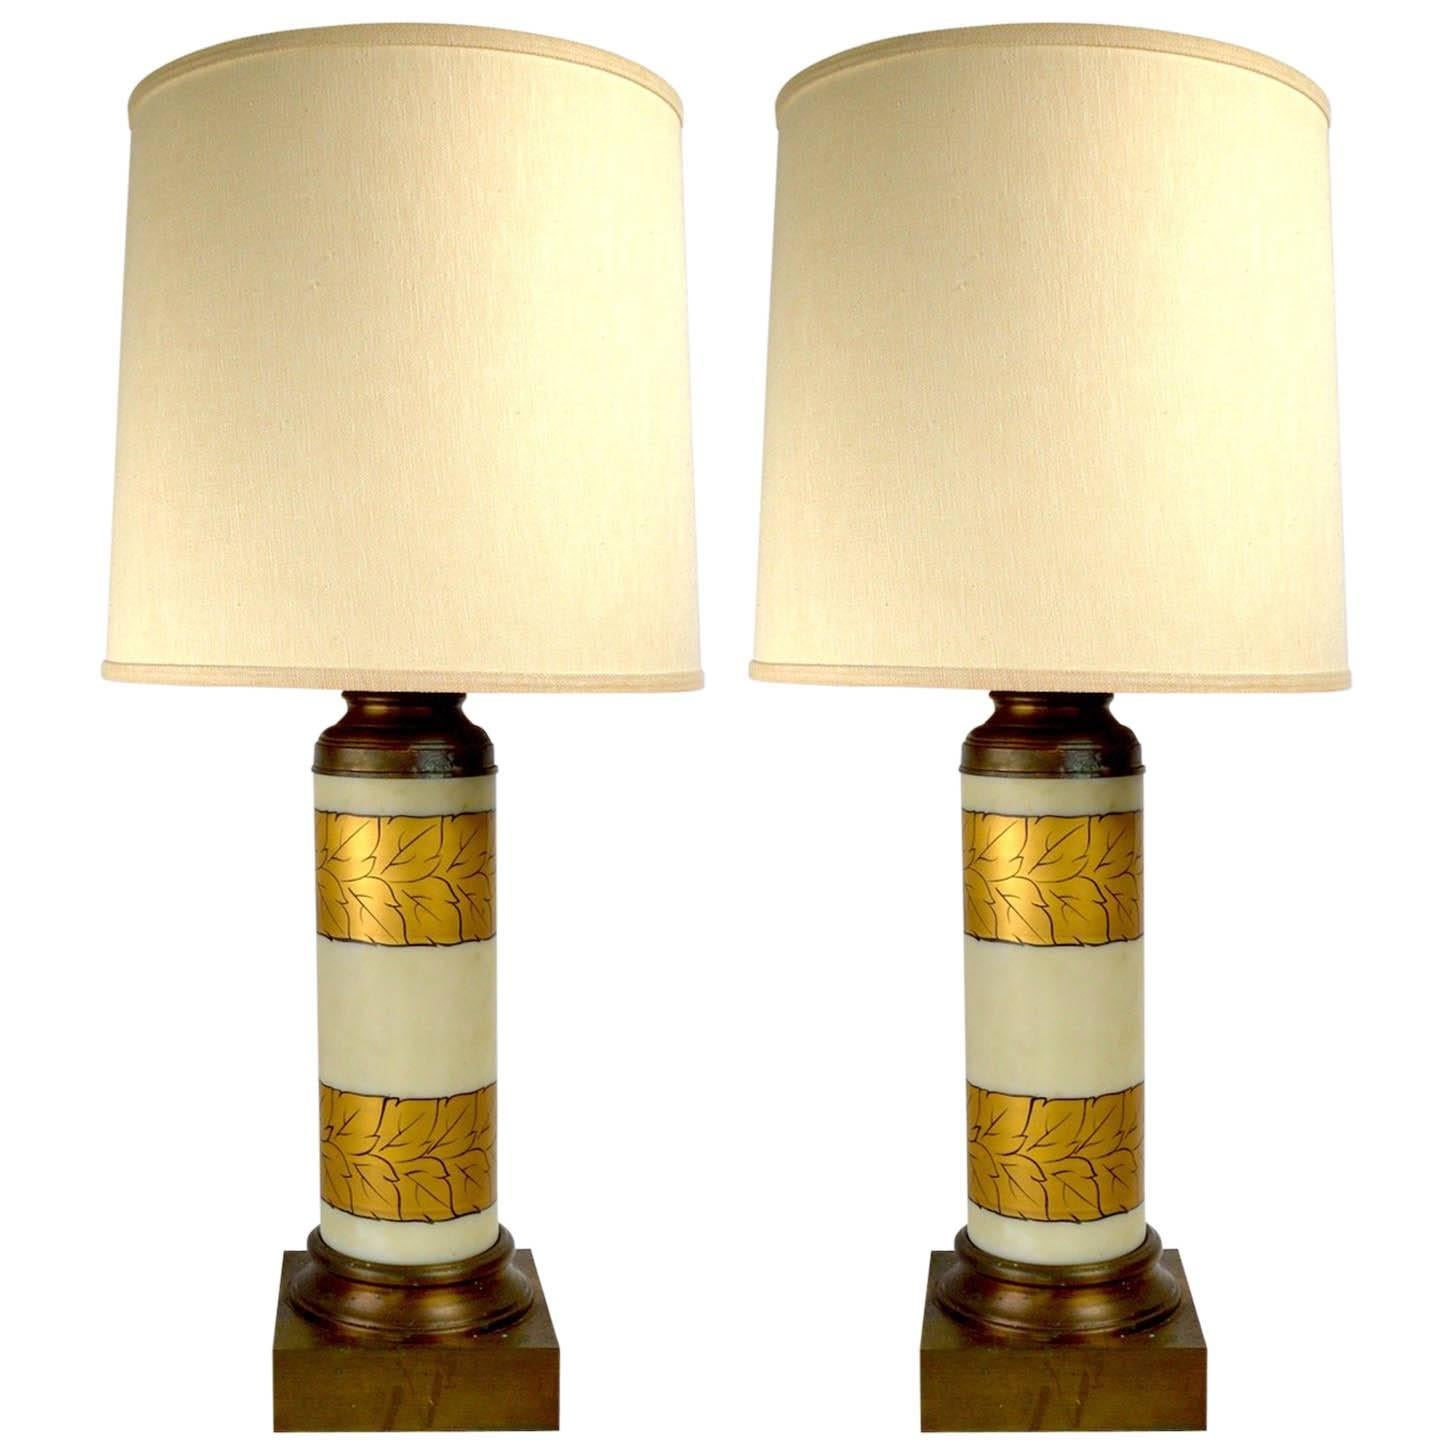 Pair of Gold Decorated Glass Table Lamps